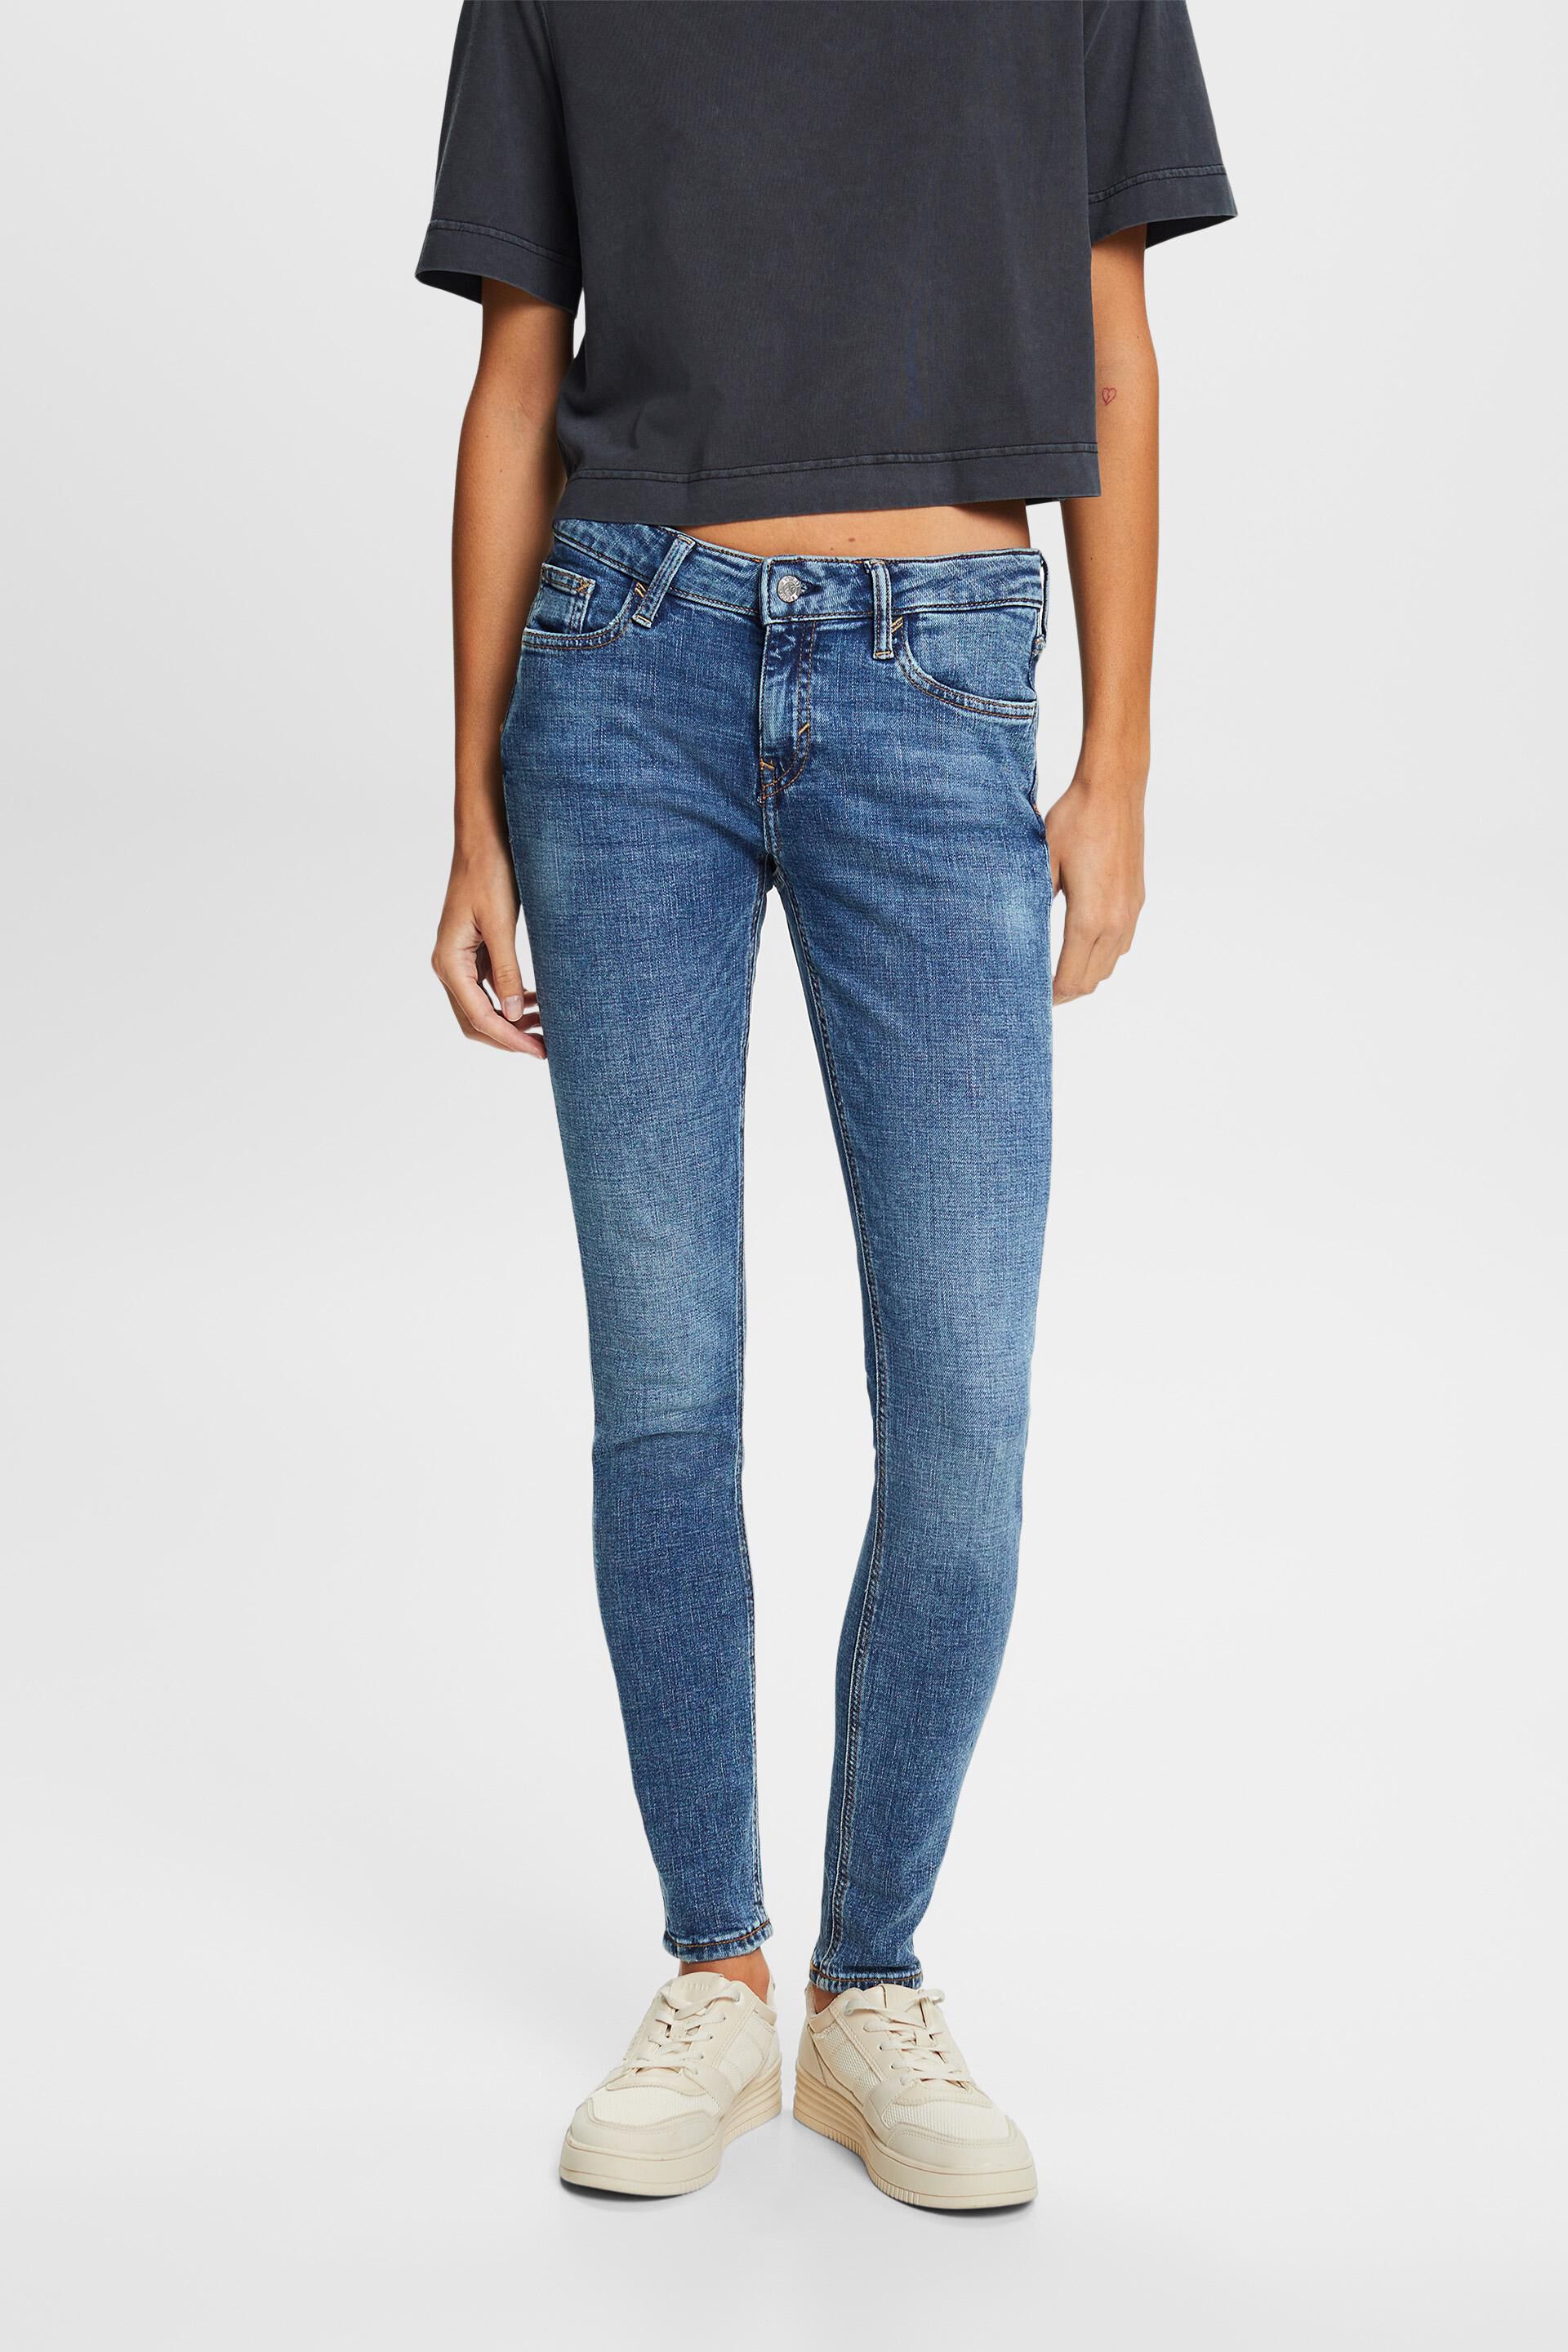 Esprit stretch fit skinny Recycled: jeans mid-rise